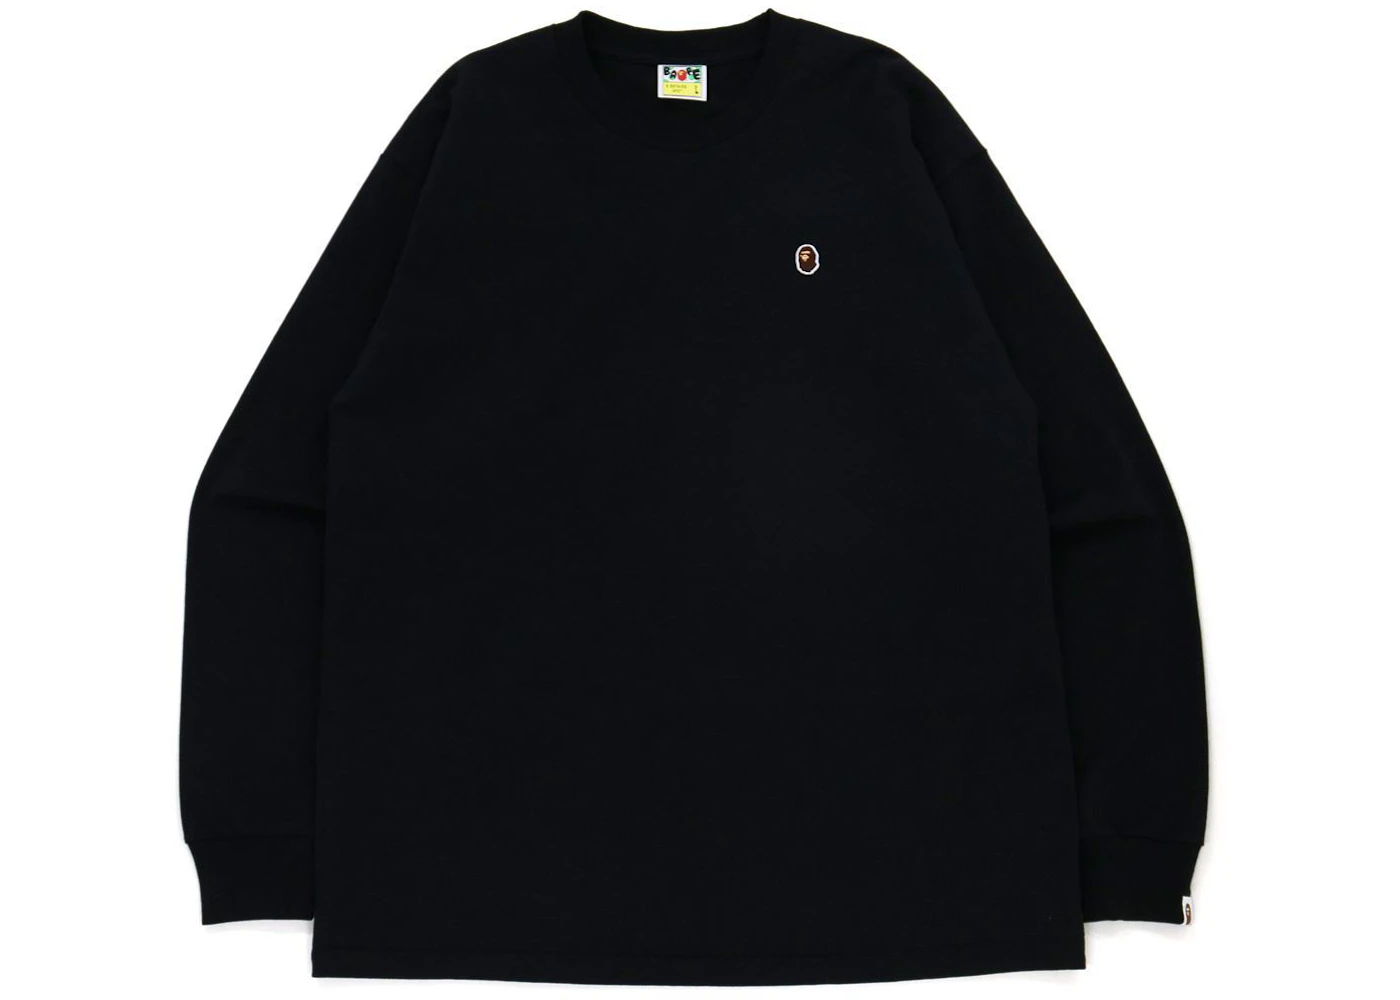 BAPE Ape Head One Point Relaxed Fit L/S Tee Black Men's - FW21 - US